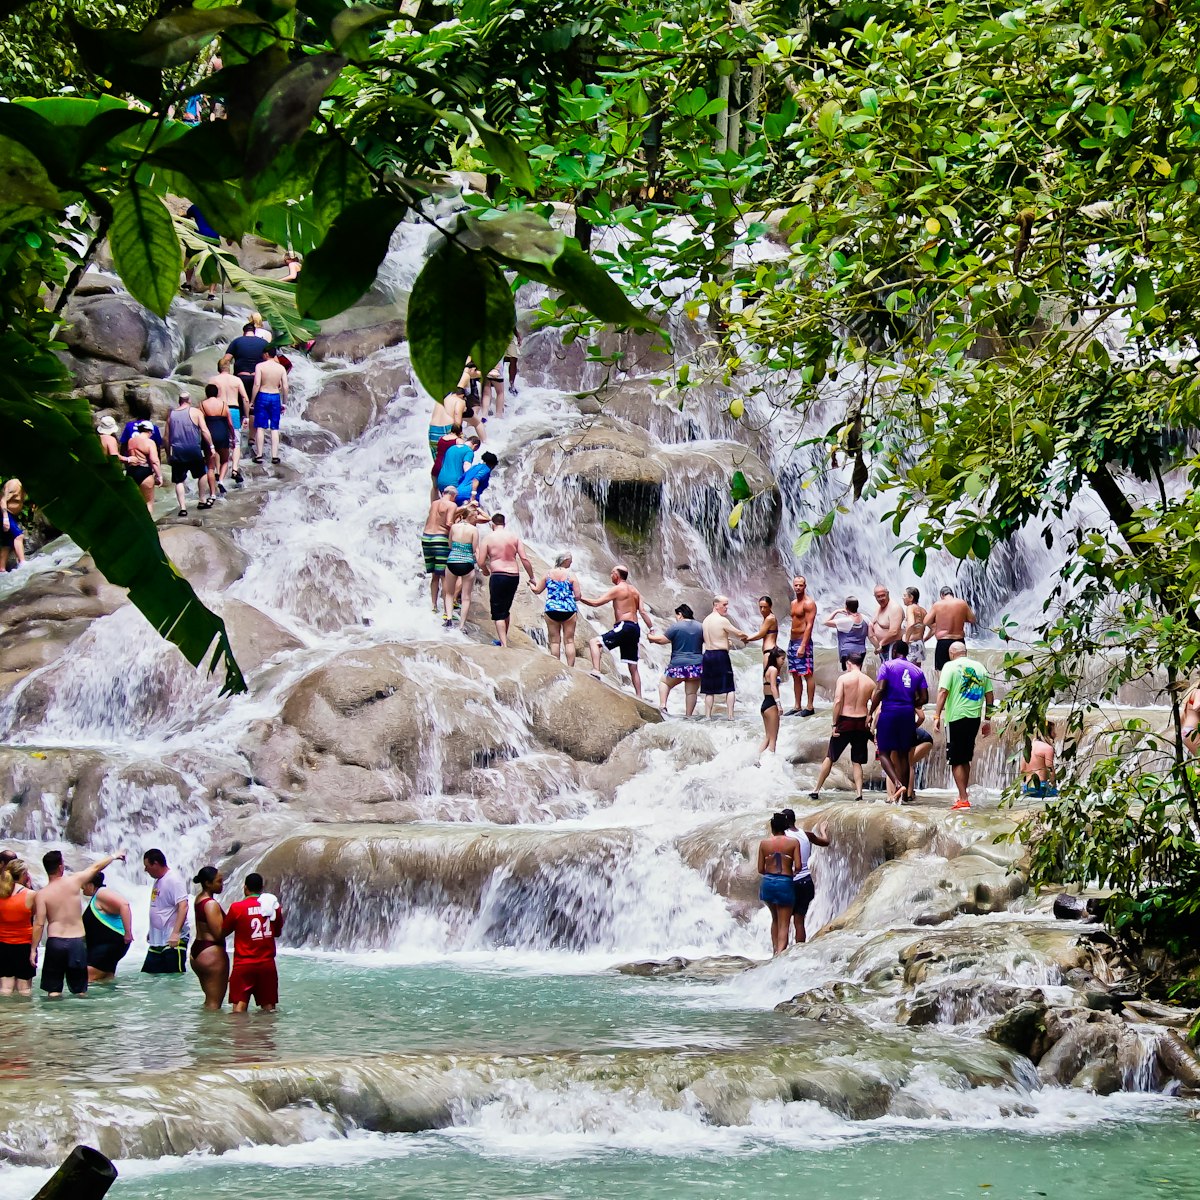 January 31, 2019: Tourists climbing the rocky terrace of Dunn’s River Falls.
1420942997
adventure, american, beautiful, caribbean, climbing, culture, dunn's river falls, environment, falls, family, flow, forest, fun, green, hand holding, jamaica, jungle, kids, landscape, lifestyle, man, nature, ocho rios, outdoor, people, plant, recreation, river, rock, rocky, saint ann, scenery, scenic, season, sport, tourism, tourist, travel, tree, vacation, vertical, view, wading, walking, water, waterfalls, white, winter, women, work